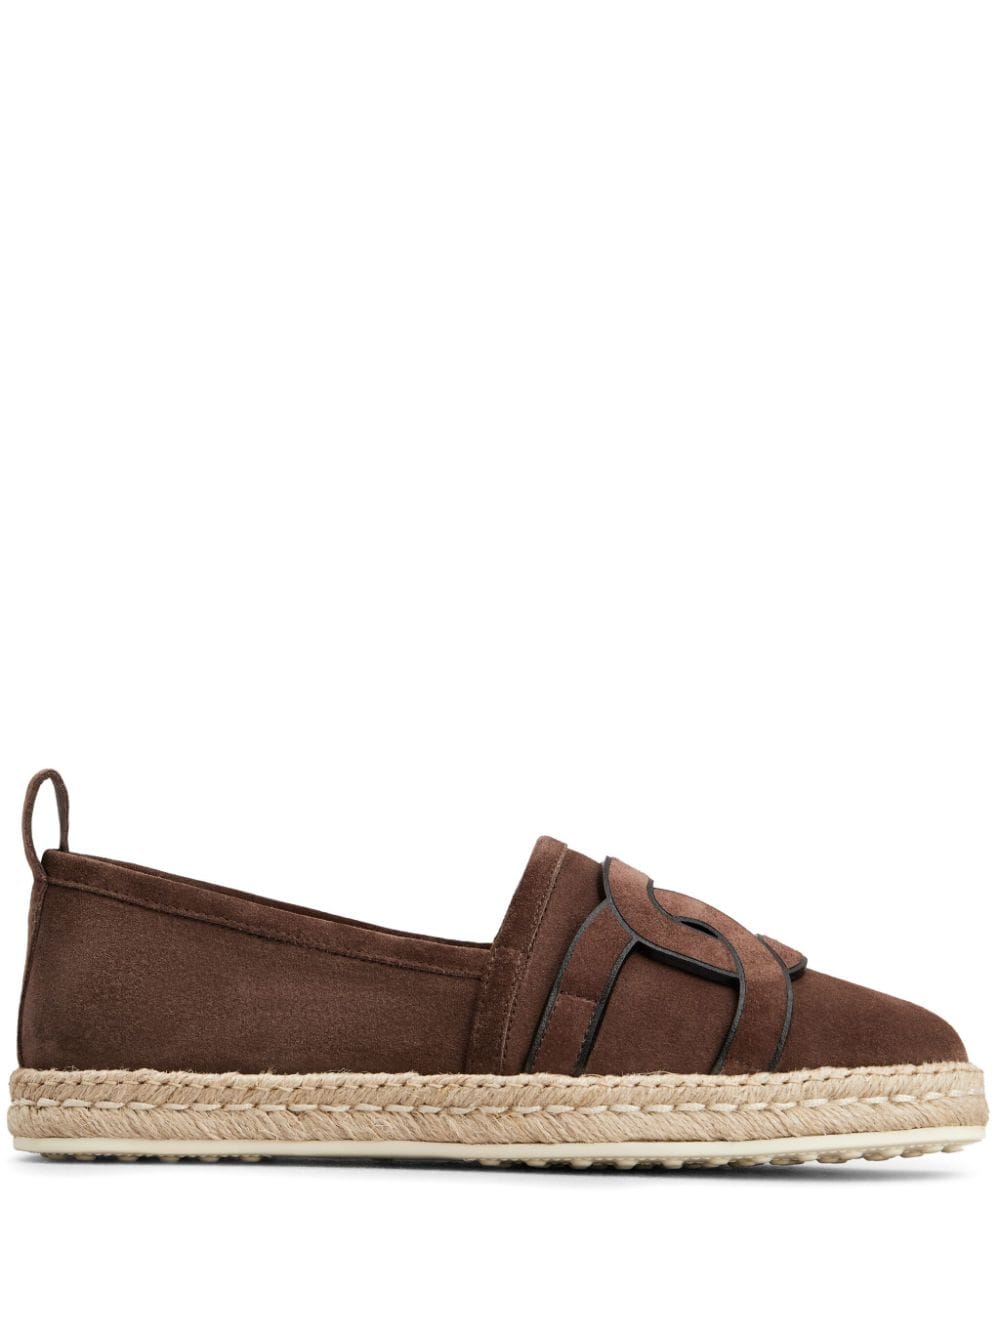 TOD'S KATE SUEDE ESPADRILLES